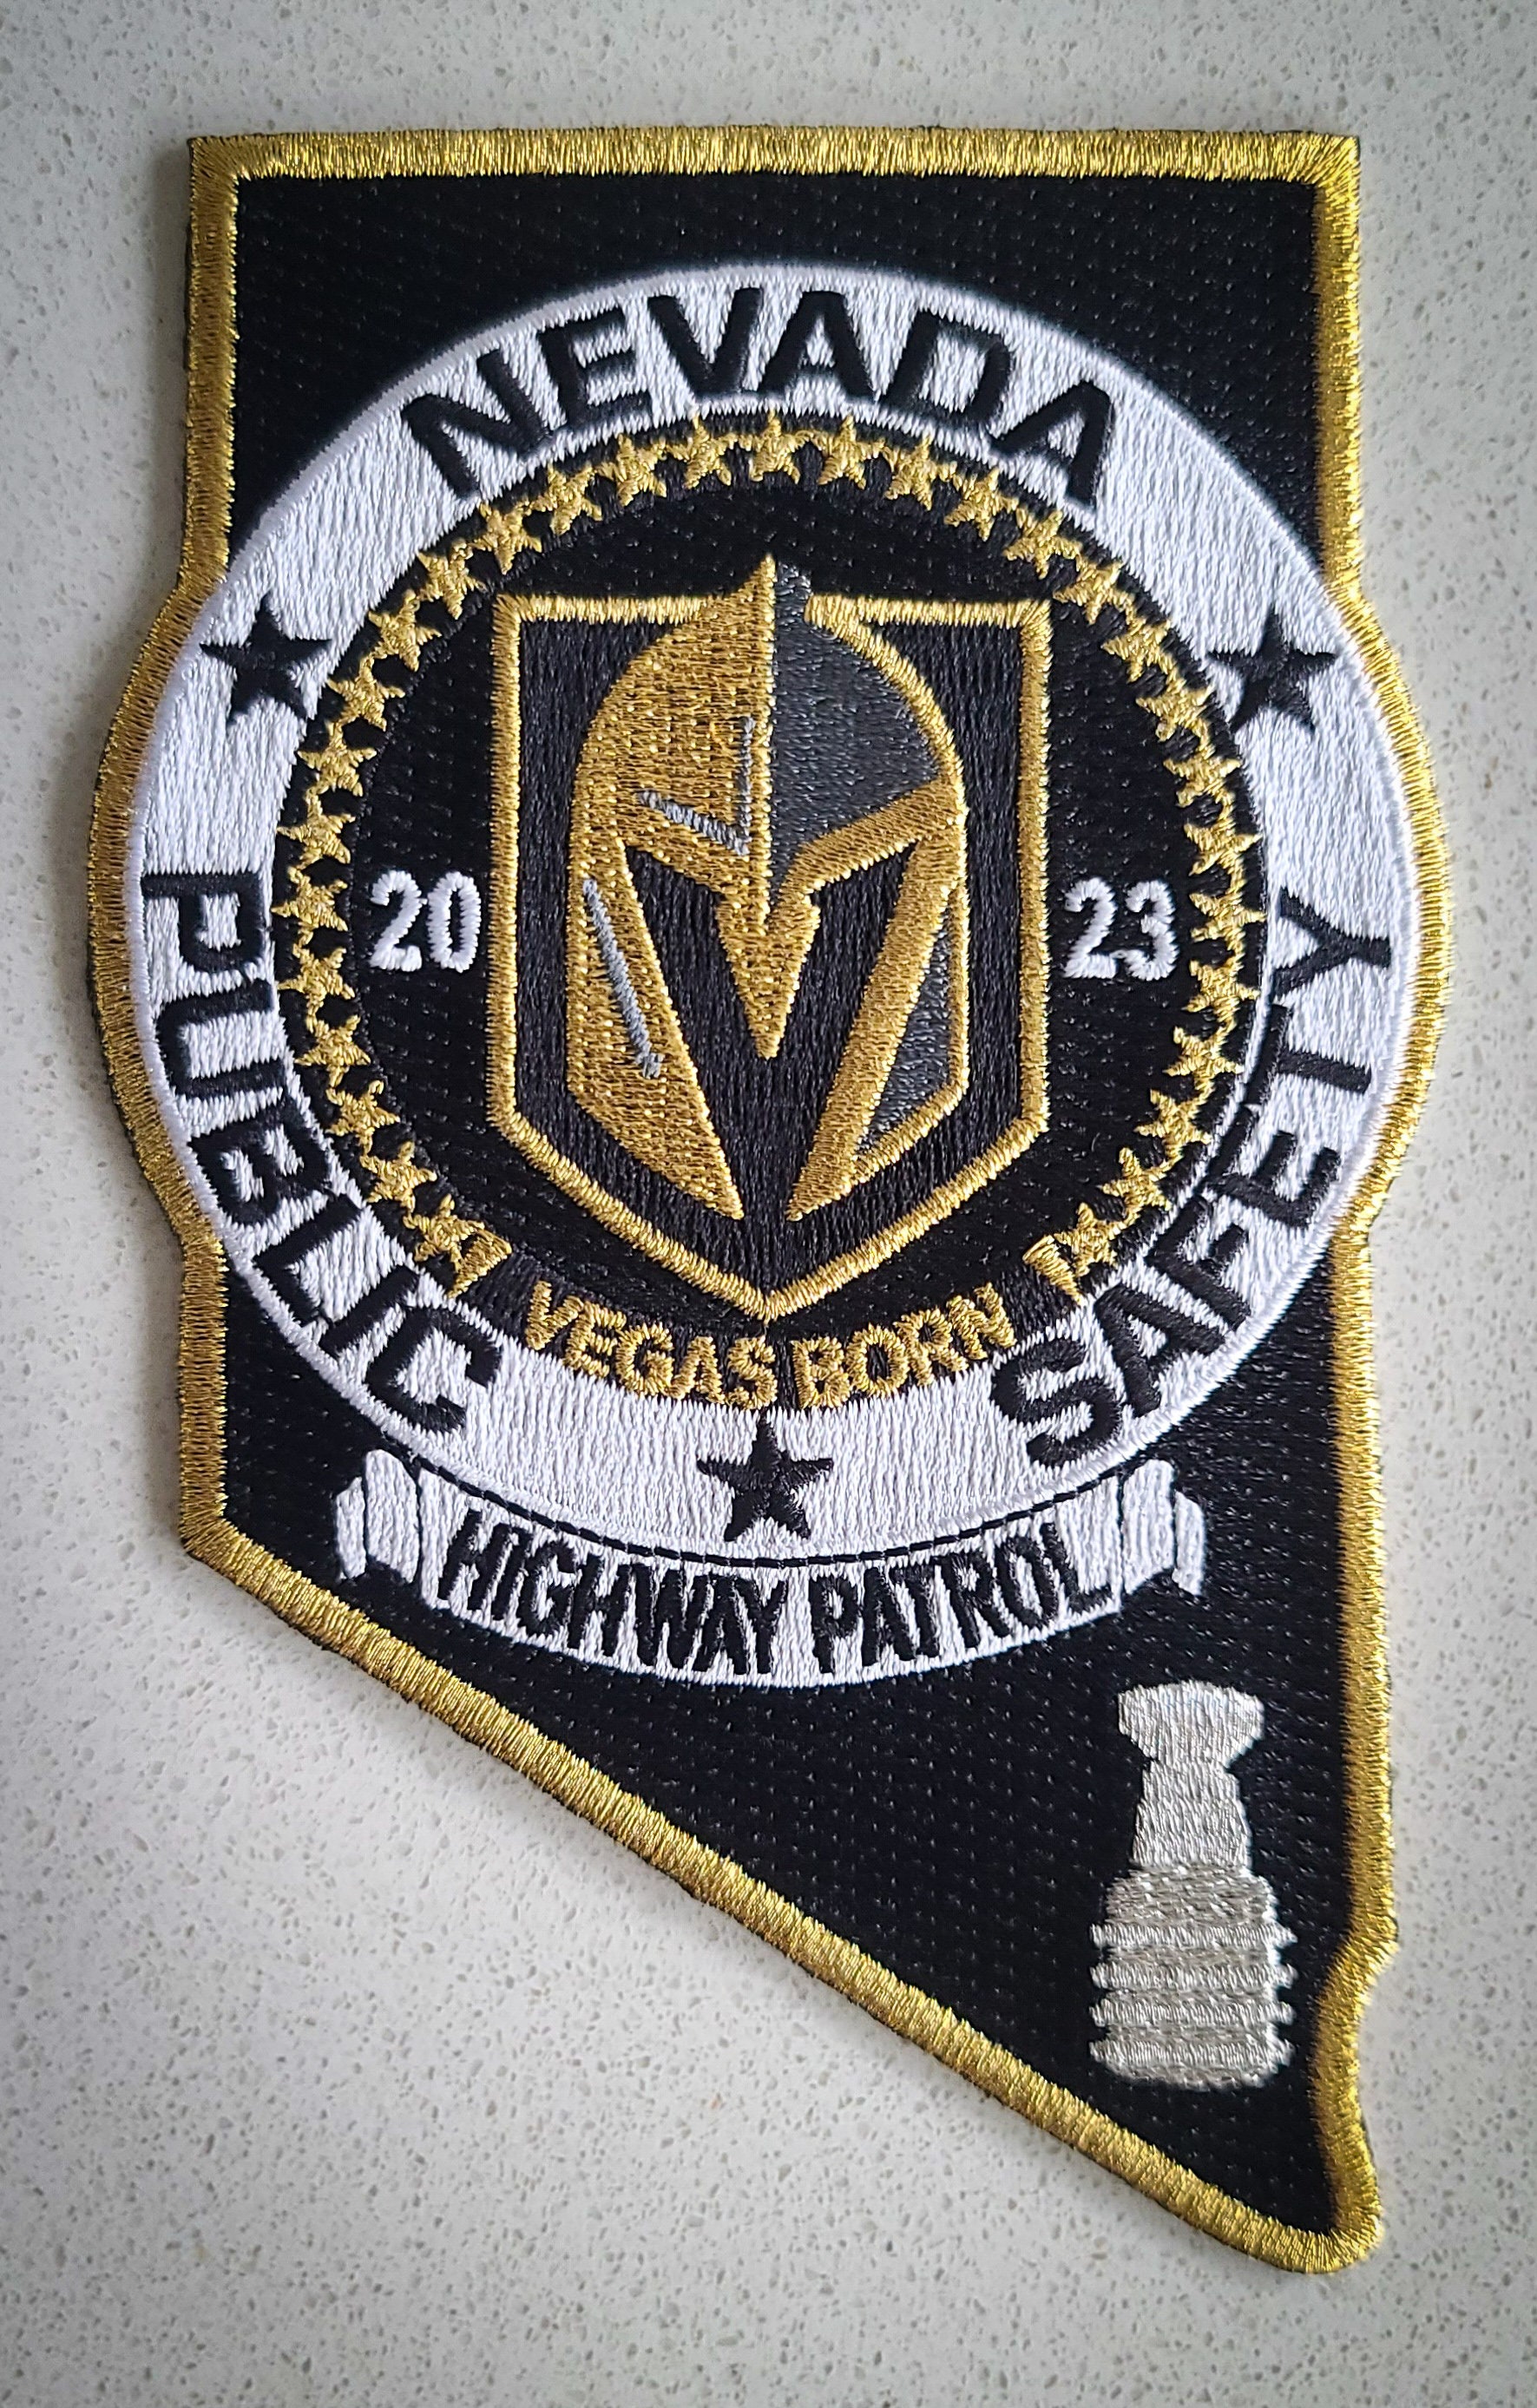 Vegas Golden Knights Logo With Gold Accent Lapel Pin  Vegas golden knights  logo, Golden knights logo, Vegas golden knights